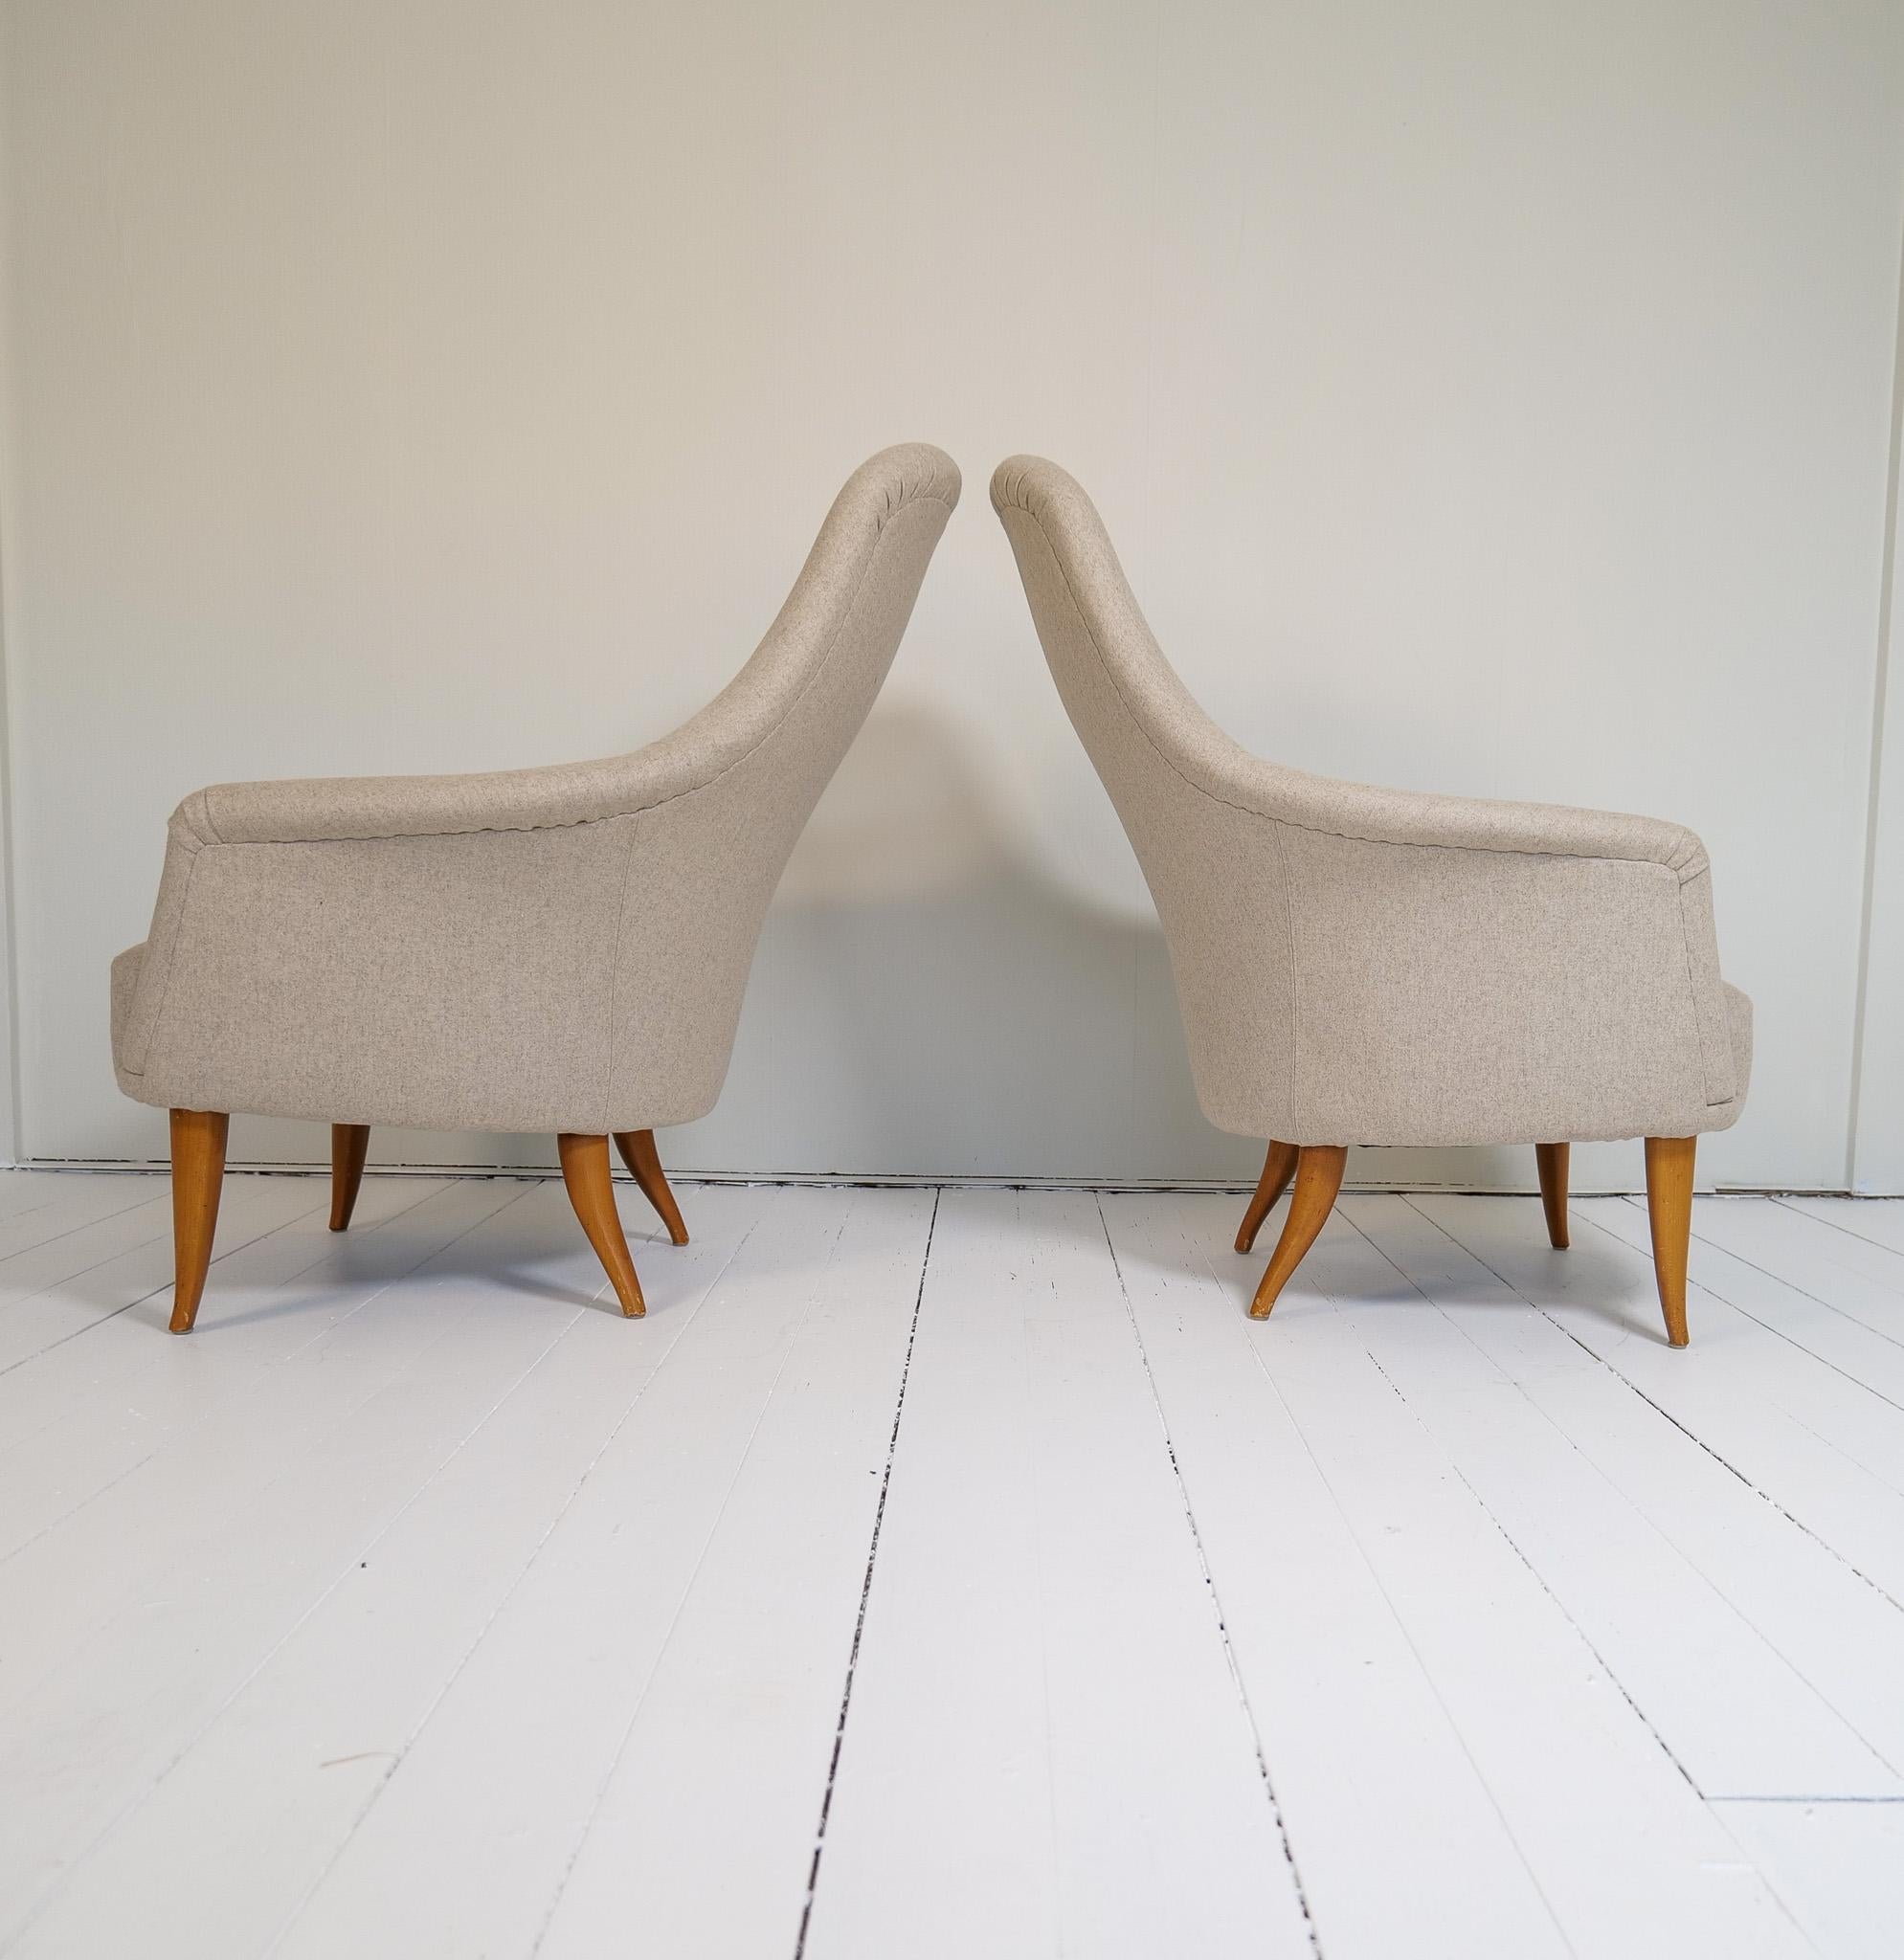 Midcentury Modern Big Adam Lounge Chairs NK, Sweden, 1950s For Sale 3